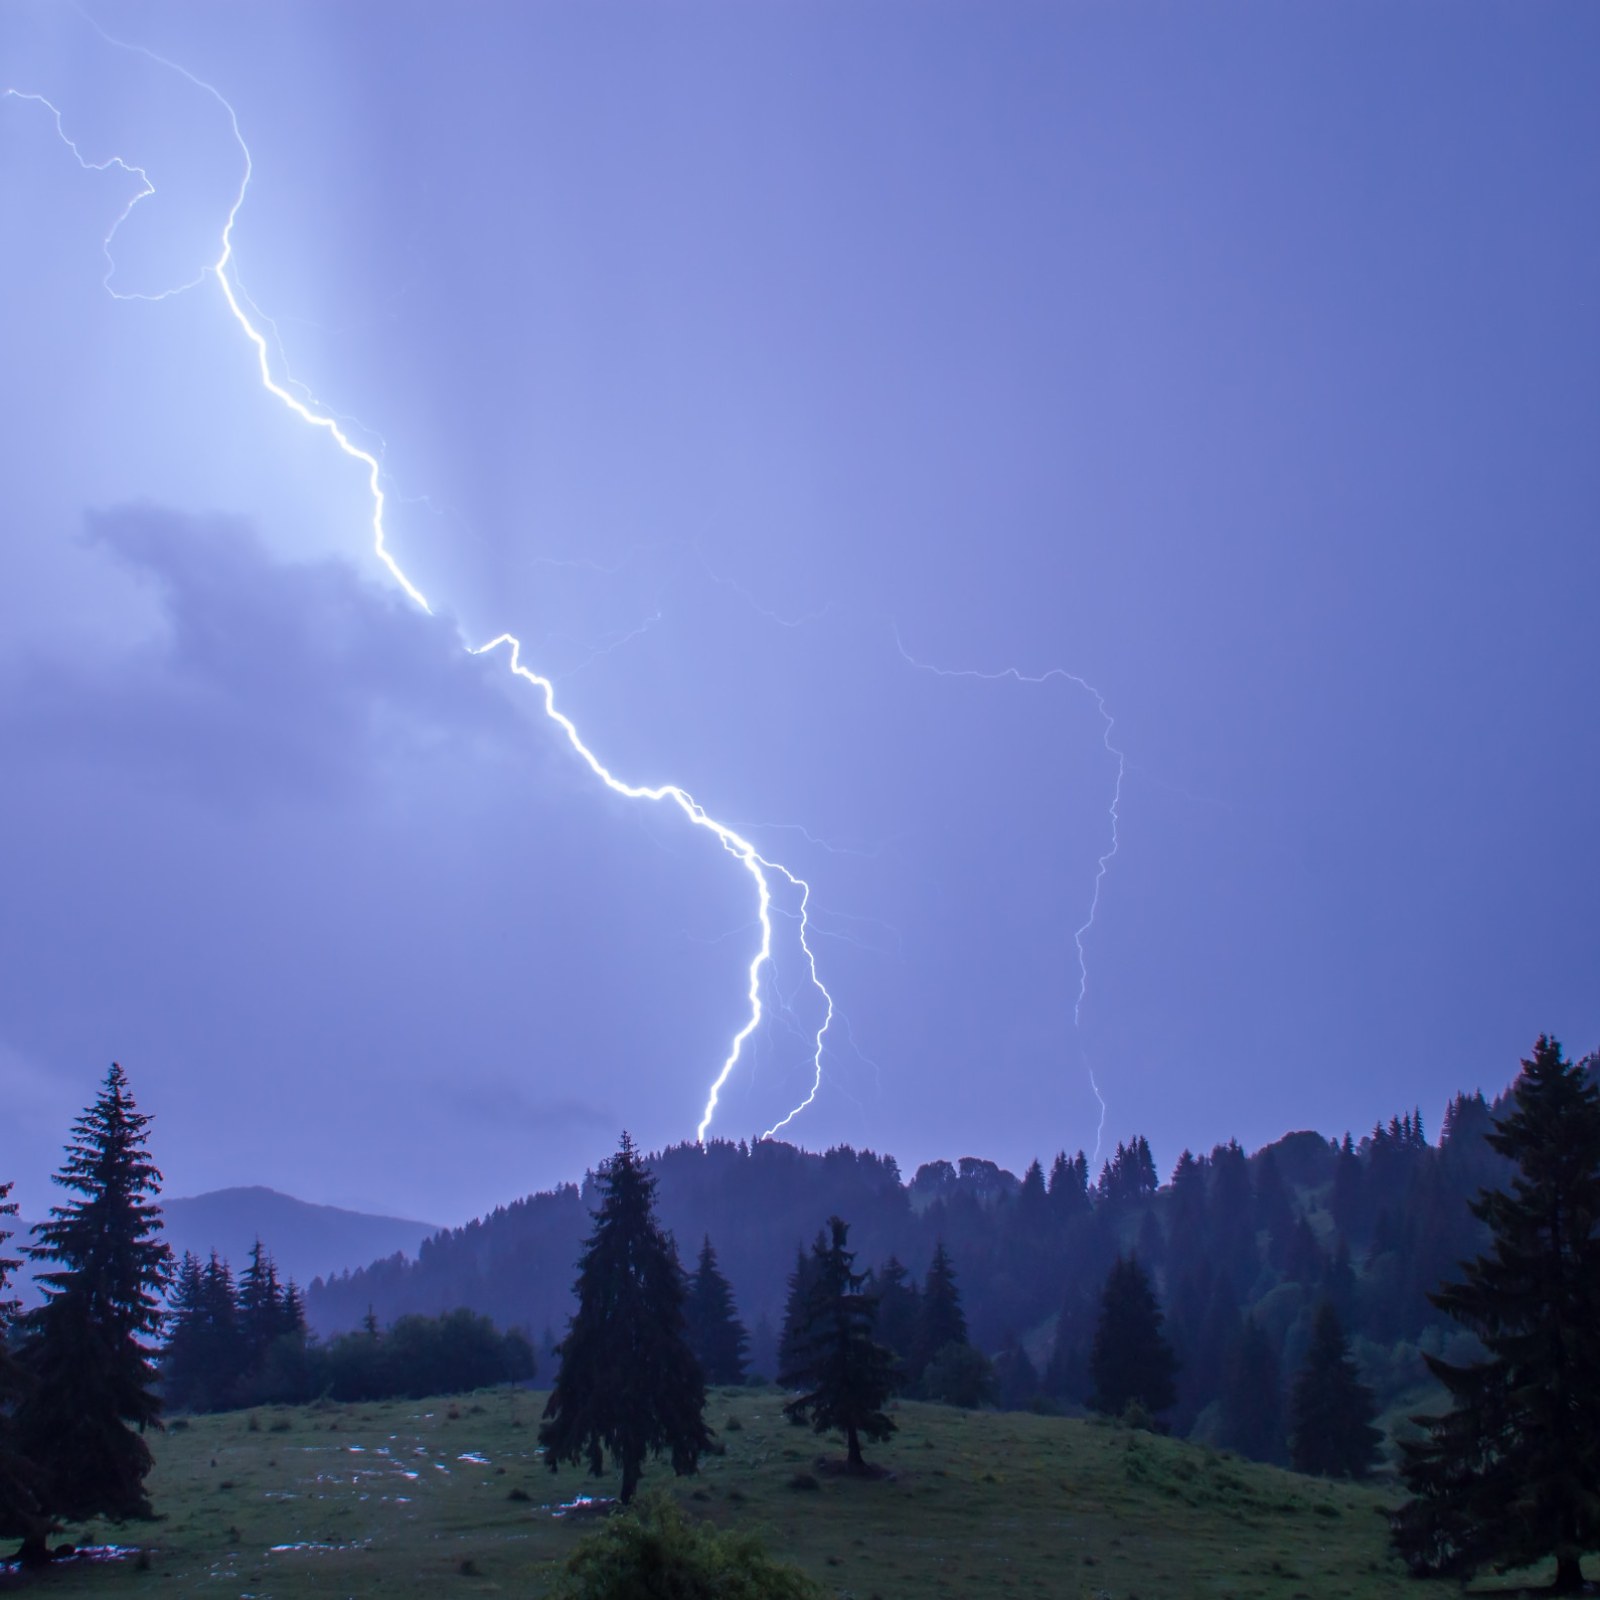 Woman Shares Moment She Realized She Was About to Be Struck by Lightning